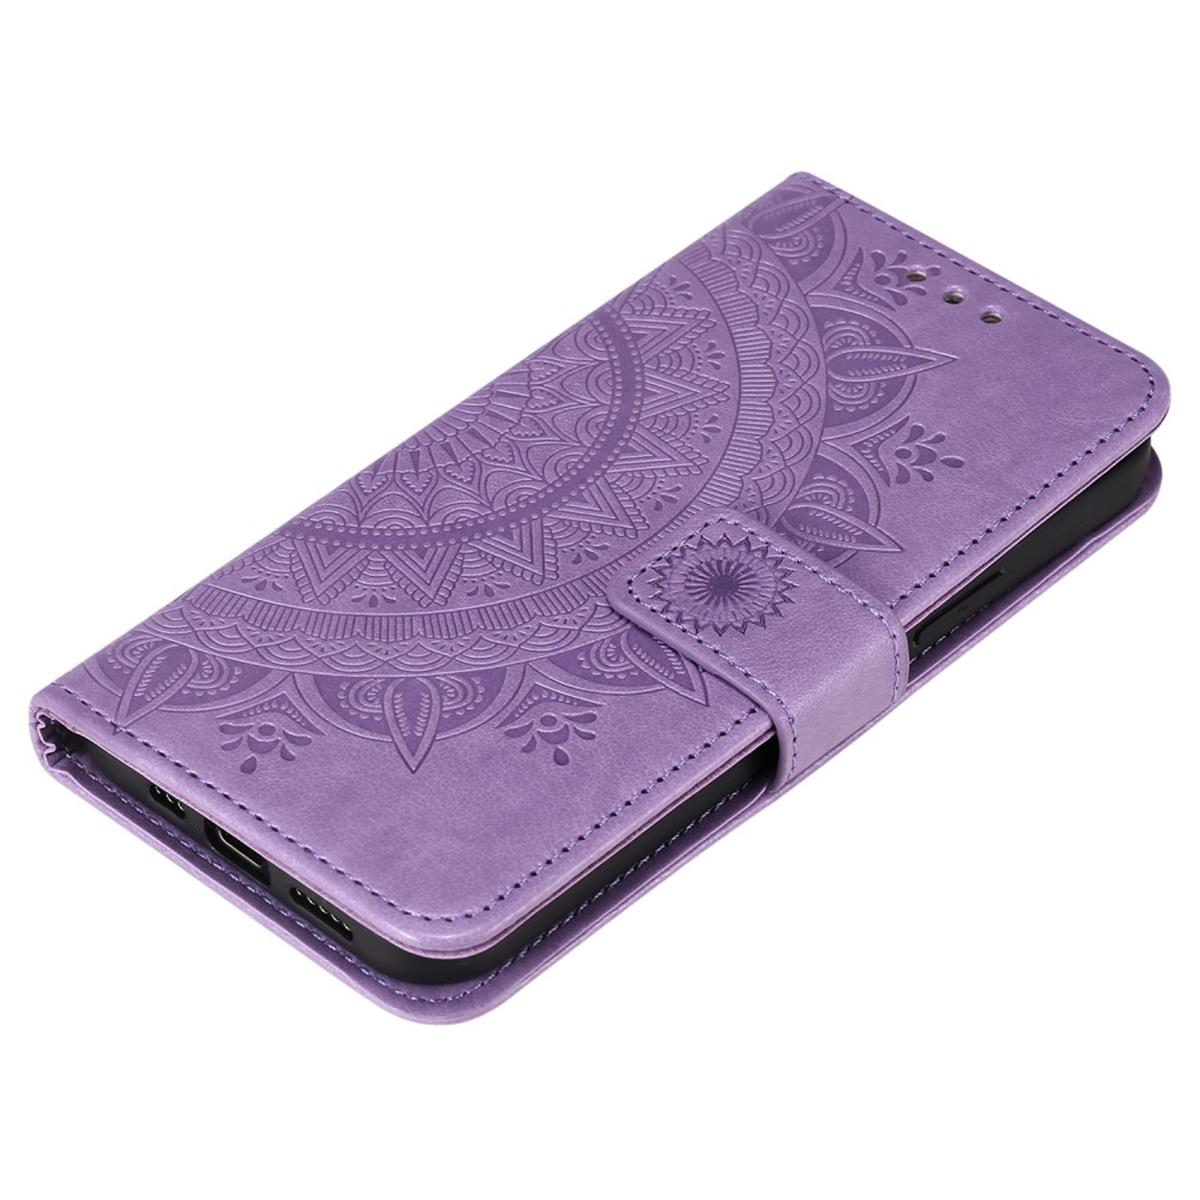 Lila Klapphülle Max, iPhone Bookcover, 12 COVERKINGZ Apple, mit Pro Muster, Mandala